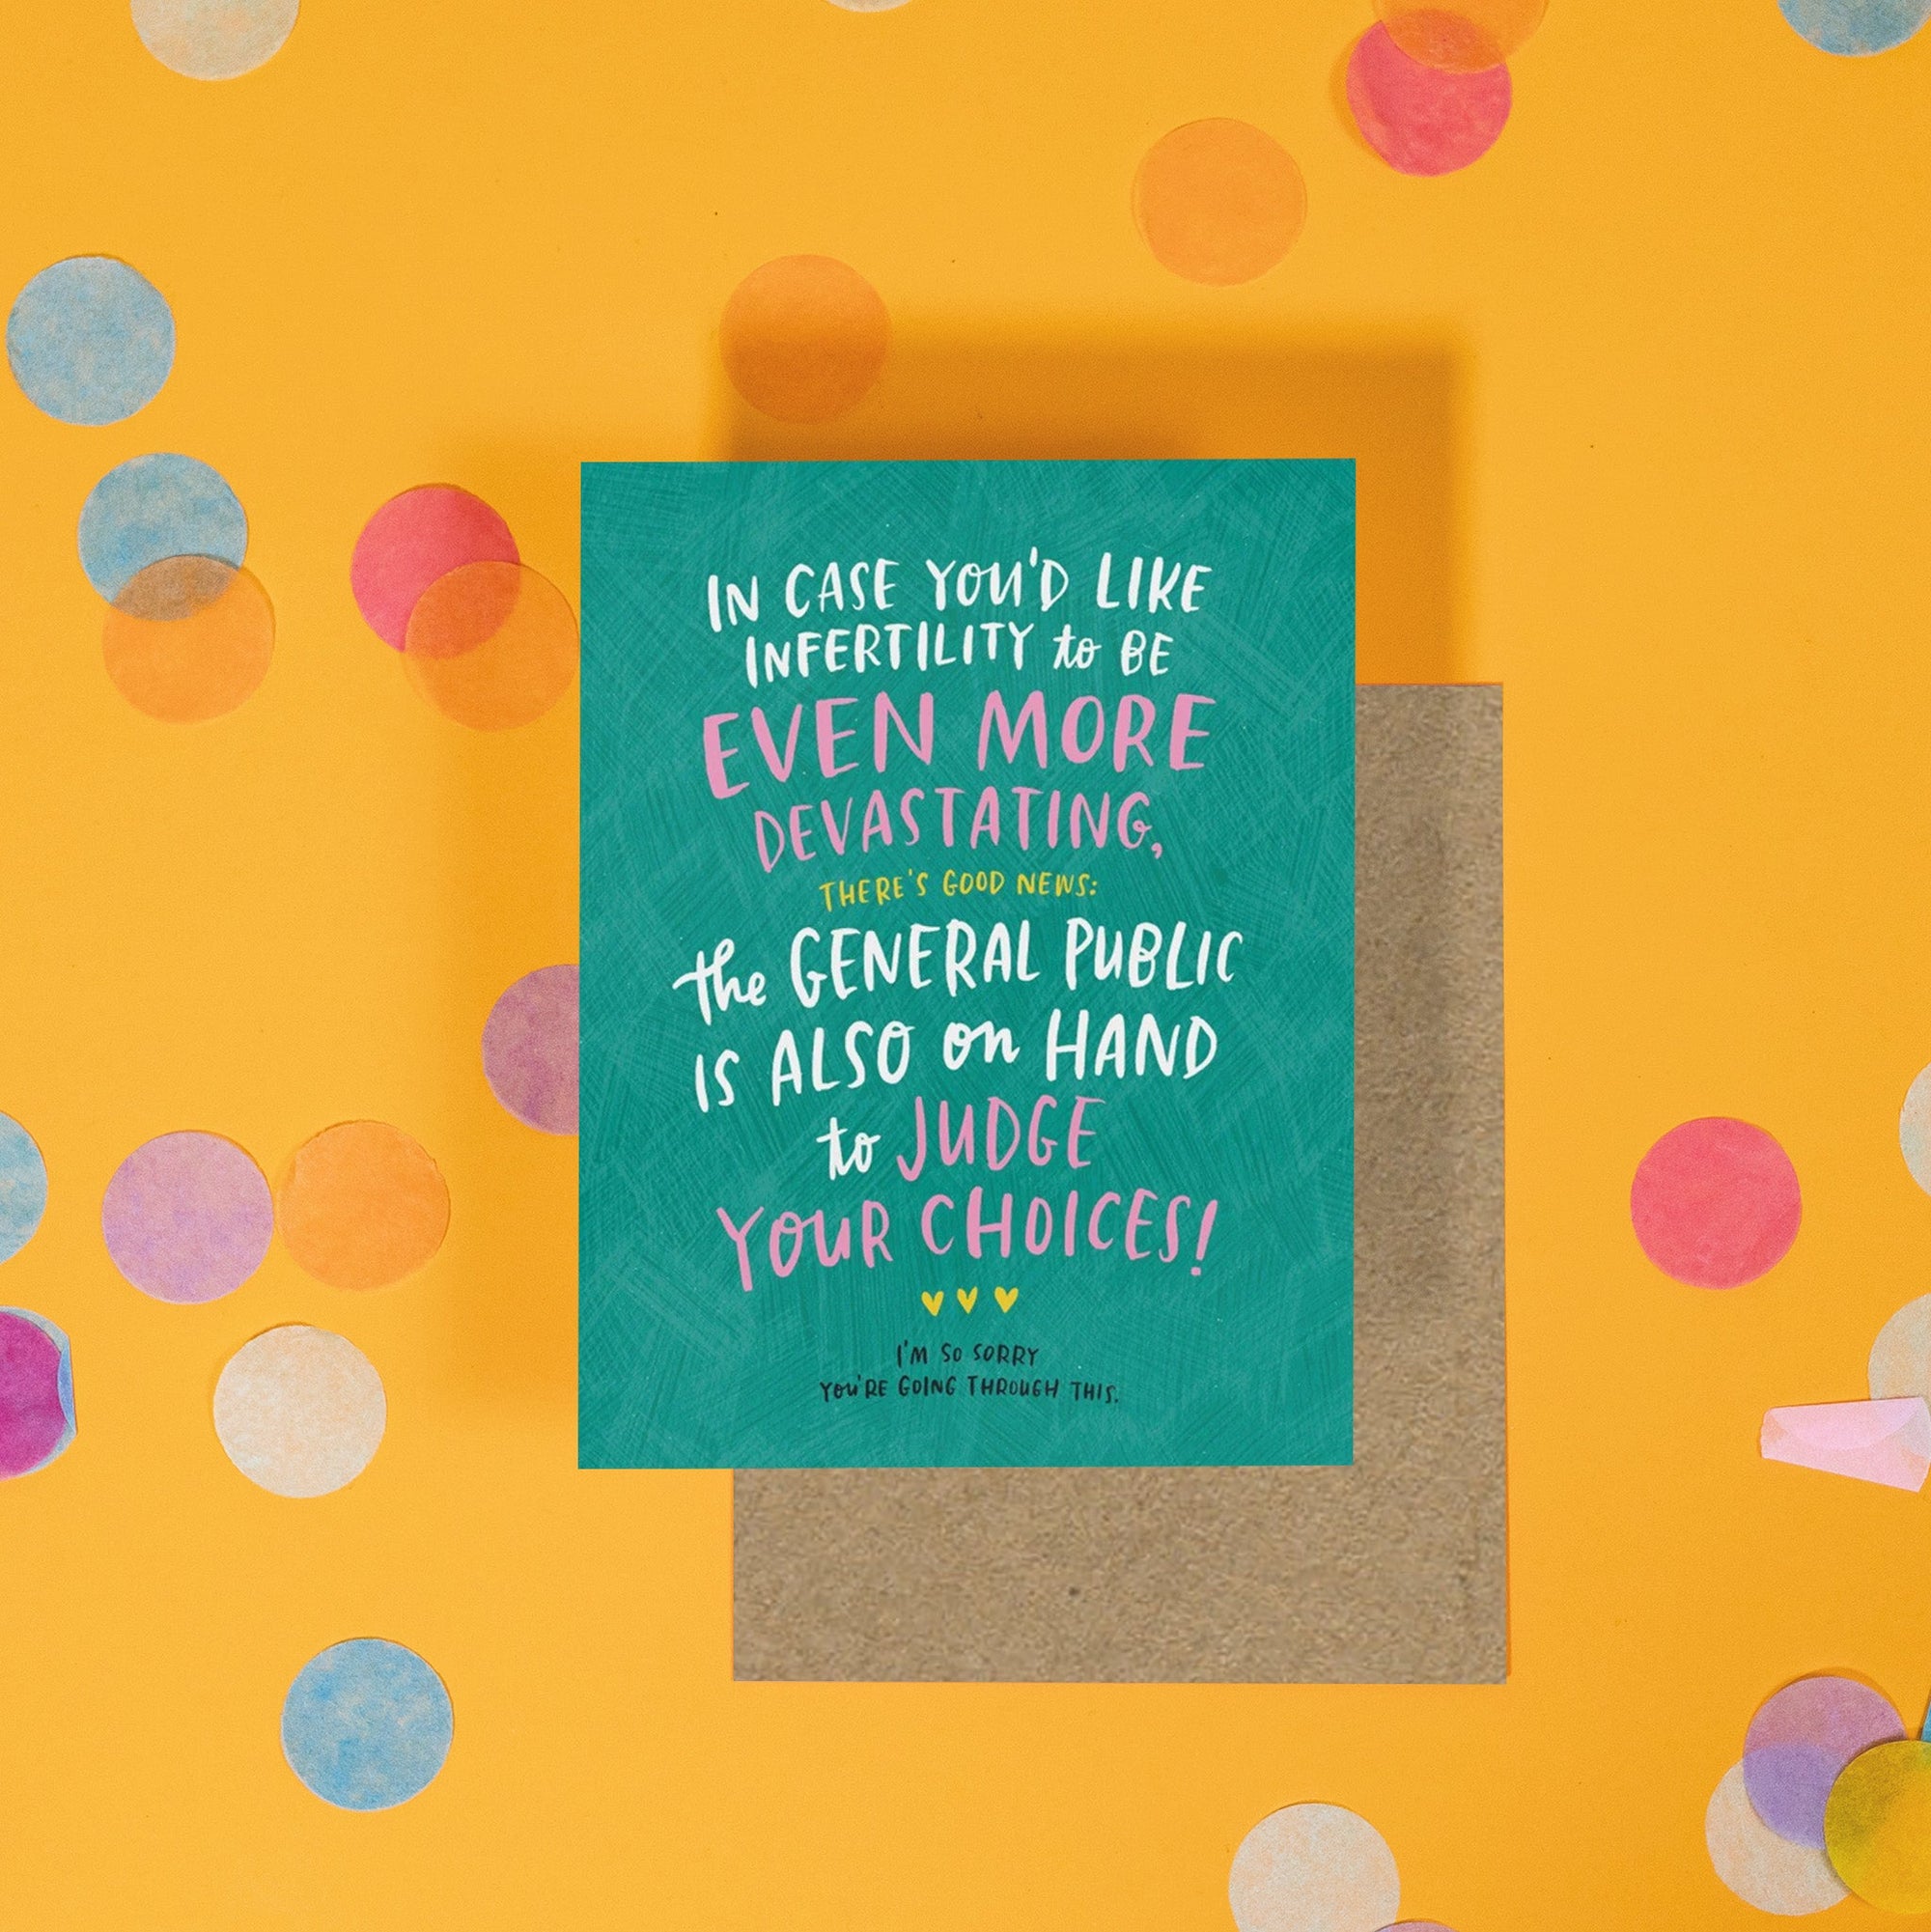 On a sunny mustard background is a greeting card and envelope with big, colorful confetti scattered around. The teal greeting card says "In case you'd like infertility to be even more devastating, there's good news: the general public is also on hand to judge your choices!" in white, pink, and yellow handwritten lettering. Under that are three yellow hearts and it says "I'm so sorry you're going through this." in black handwritten lettering. A kraft envelope sits under the card. 